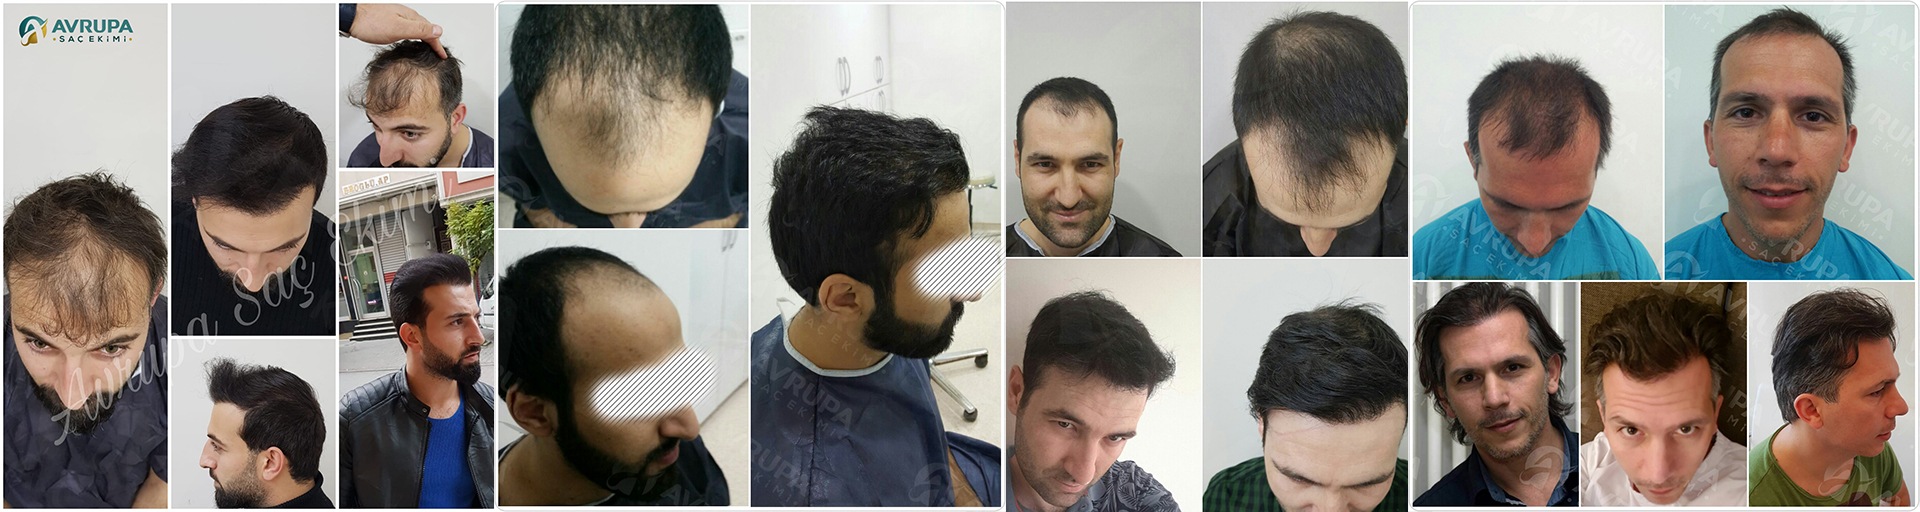 Hair transplant in Turkey before and after- 6 real cases with photos